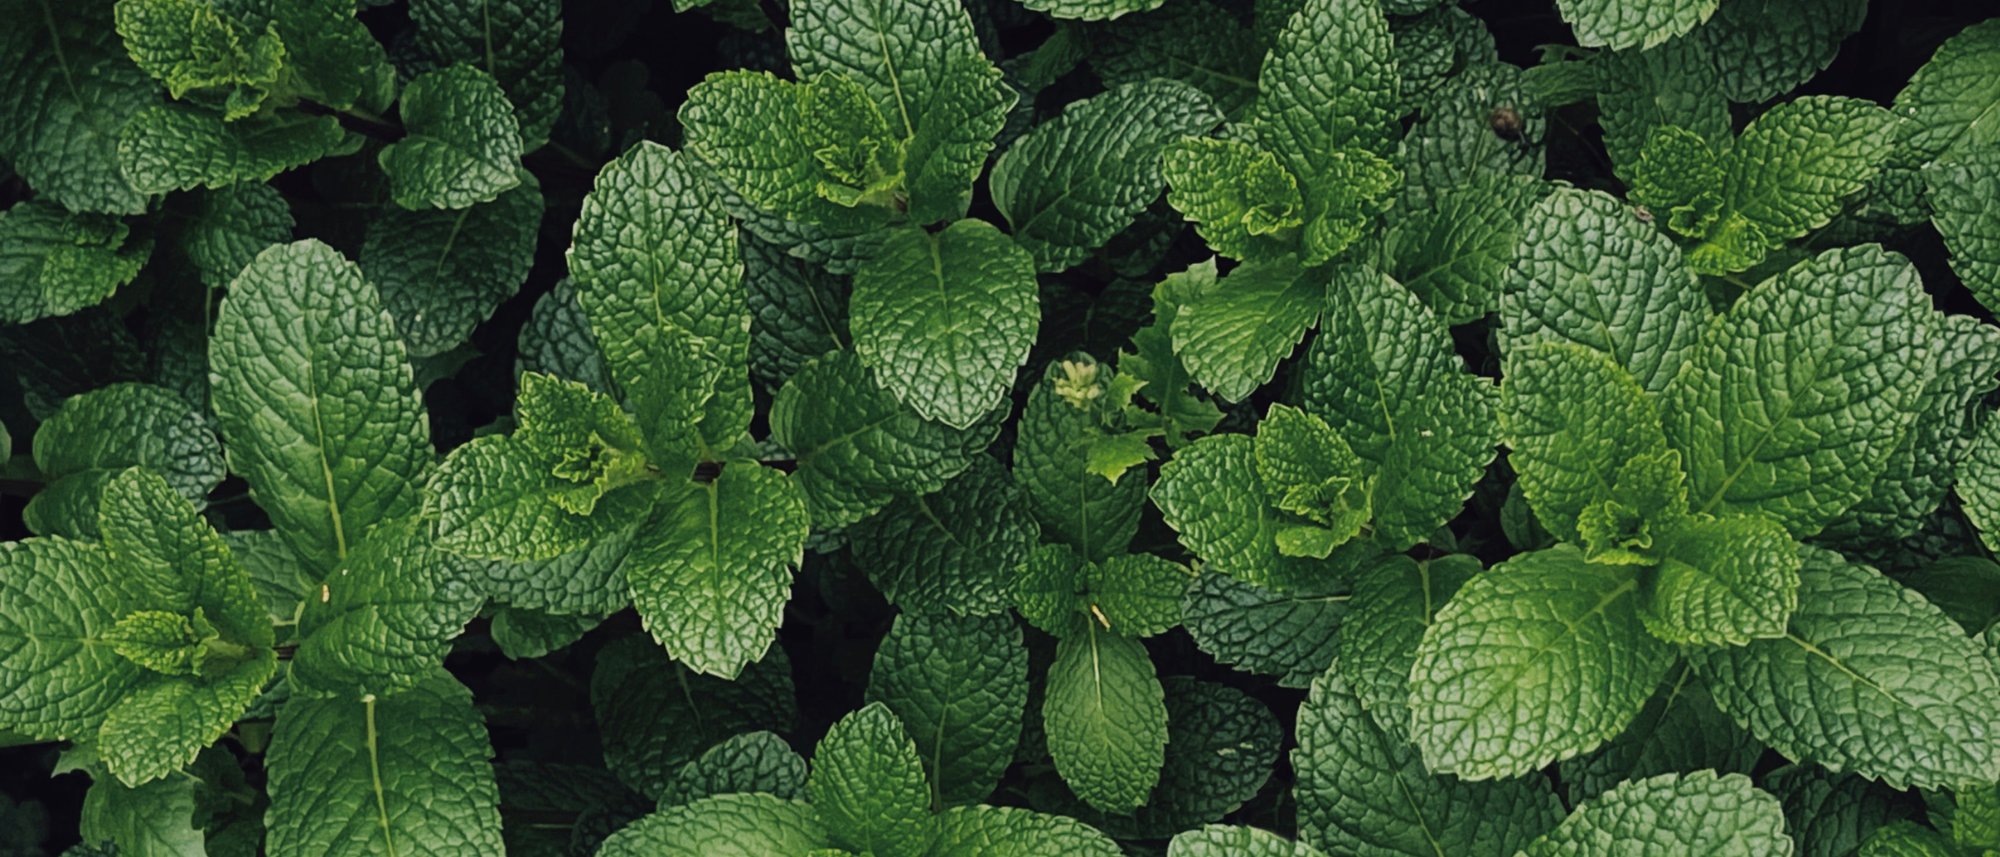 Perennial herb mint for freshness every year